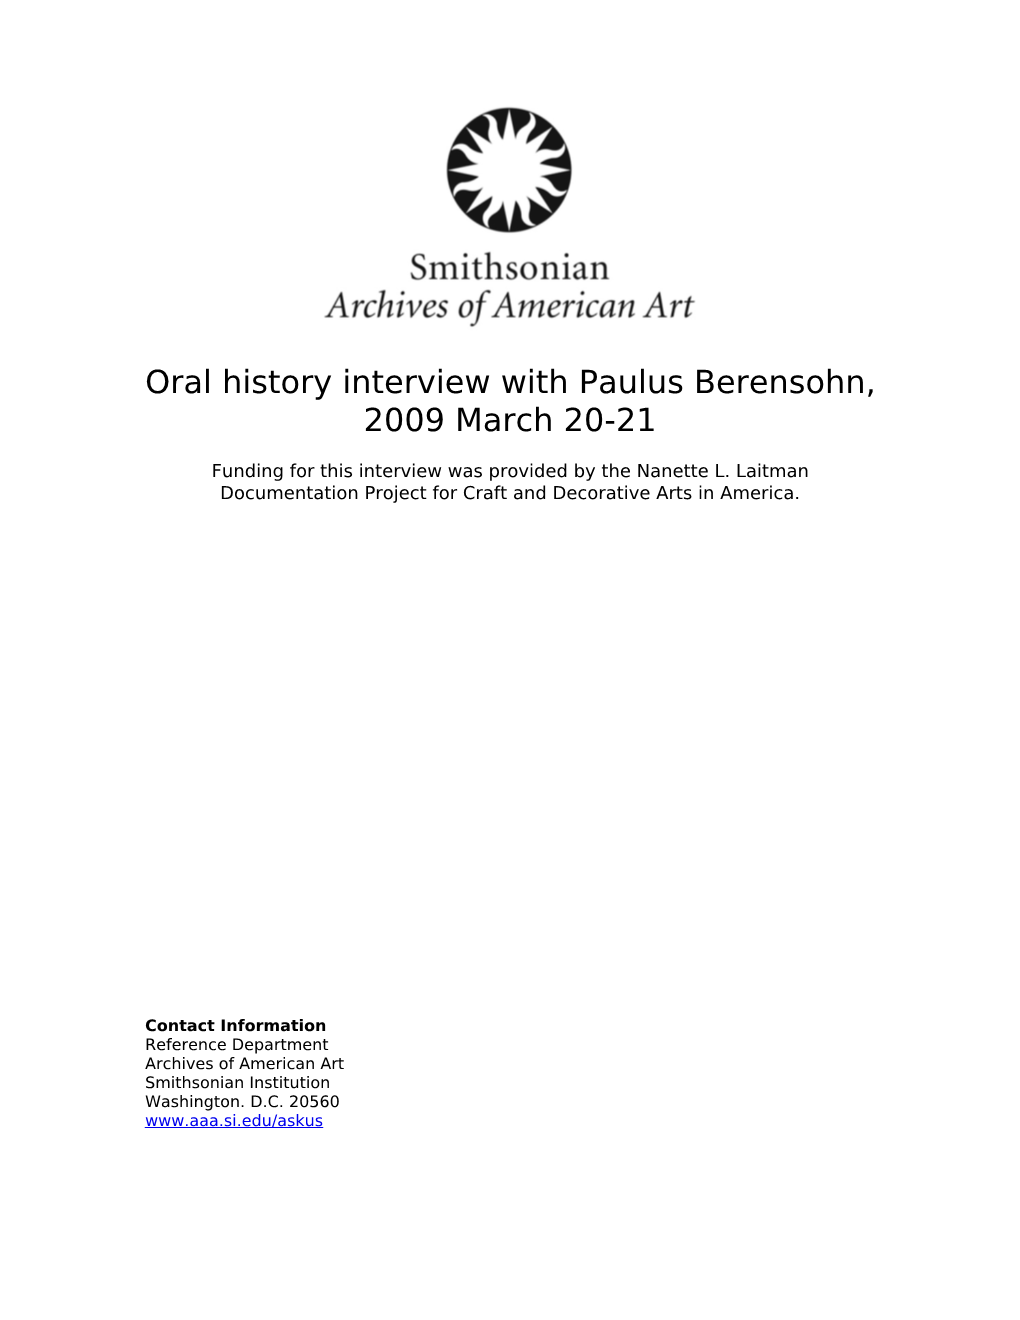 Oral History Interview with Paulus Berensohn, 2009 March 20-21